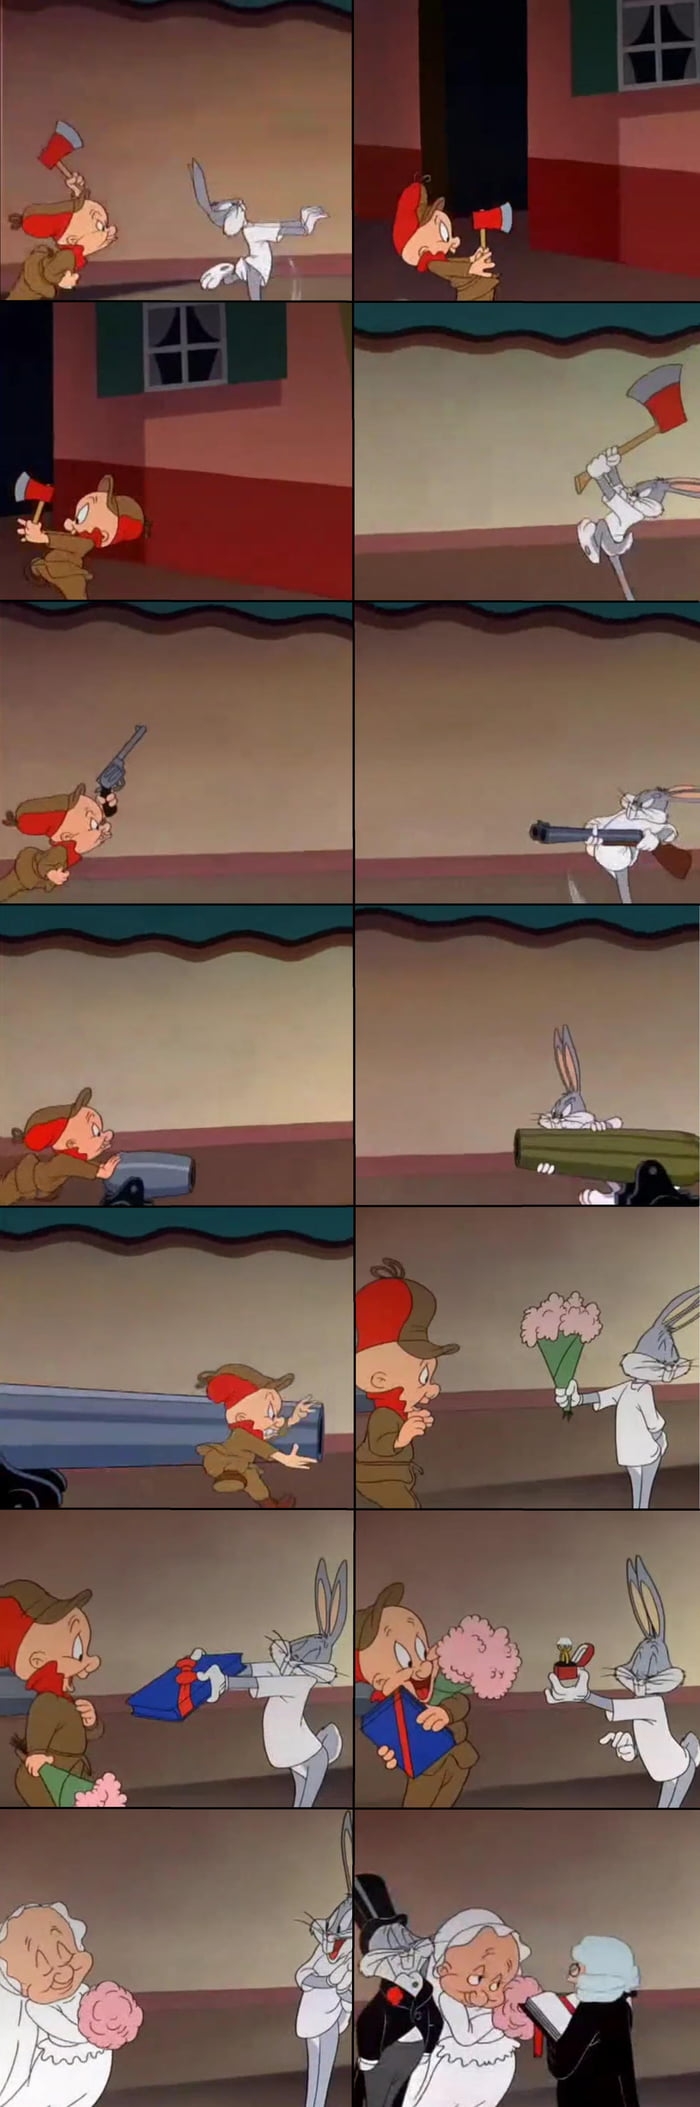 One of the best scenes in Bugs Bunny